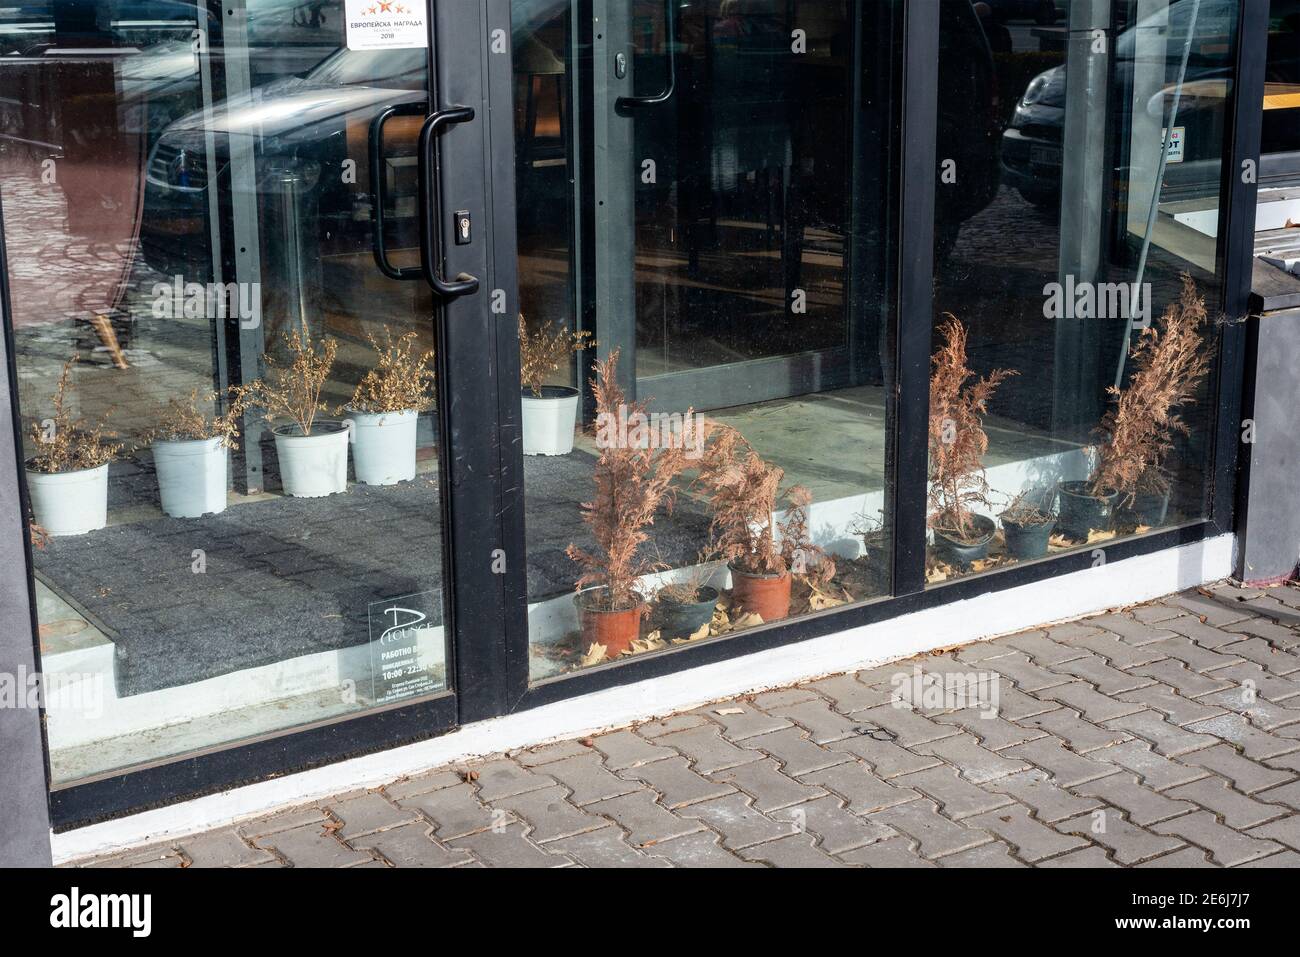 Dead flowers at a neglected closed down restaurant glass entrance facade due to the Covid-19 pandemic outbreak in Sofia Bulgaria Europe Stock Photo